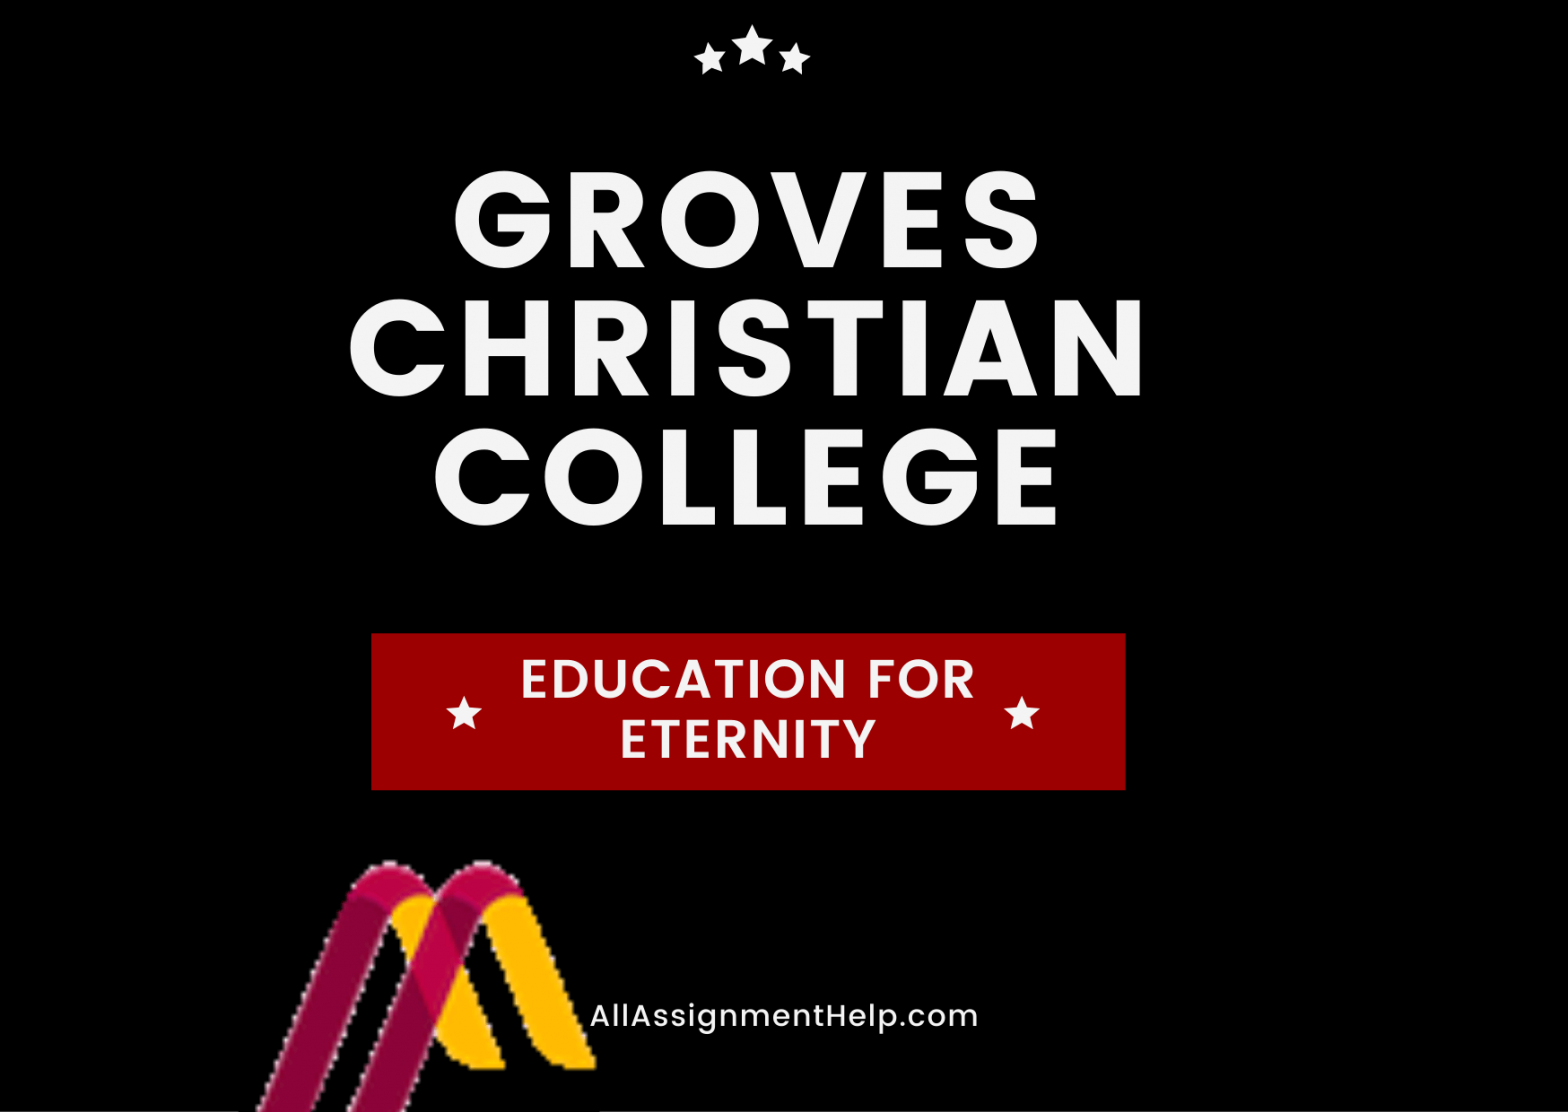 Groves Christian College